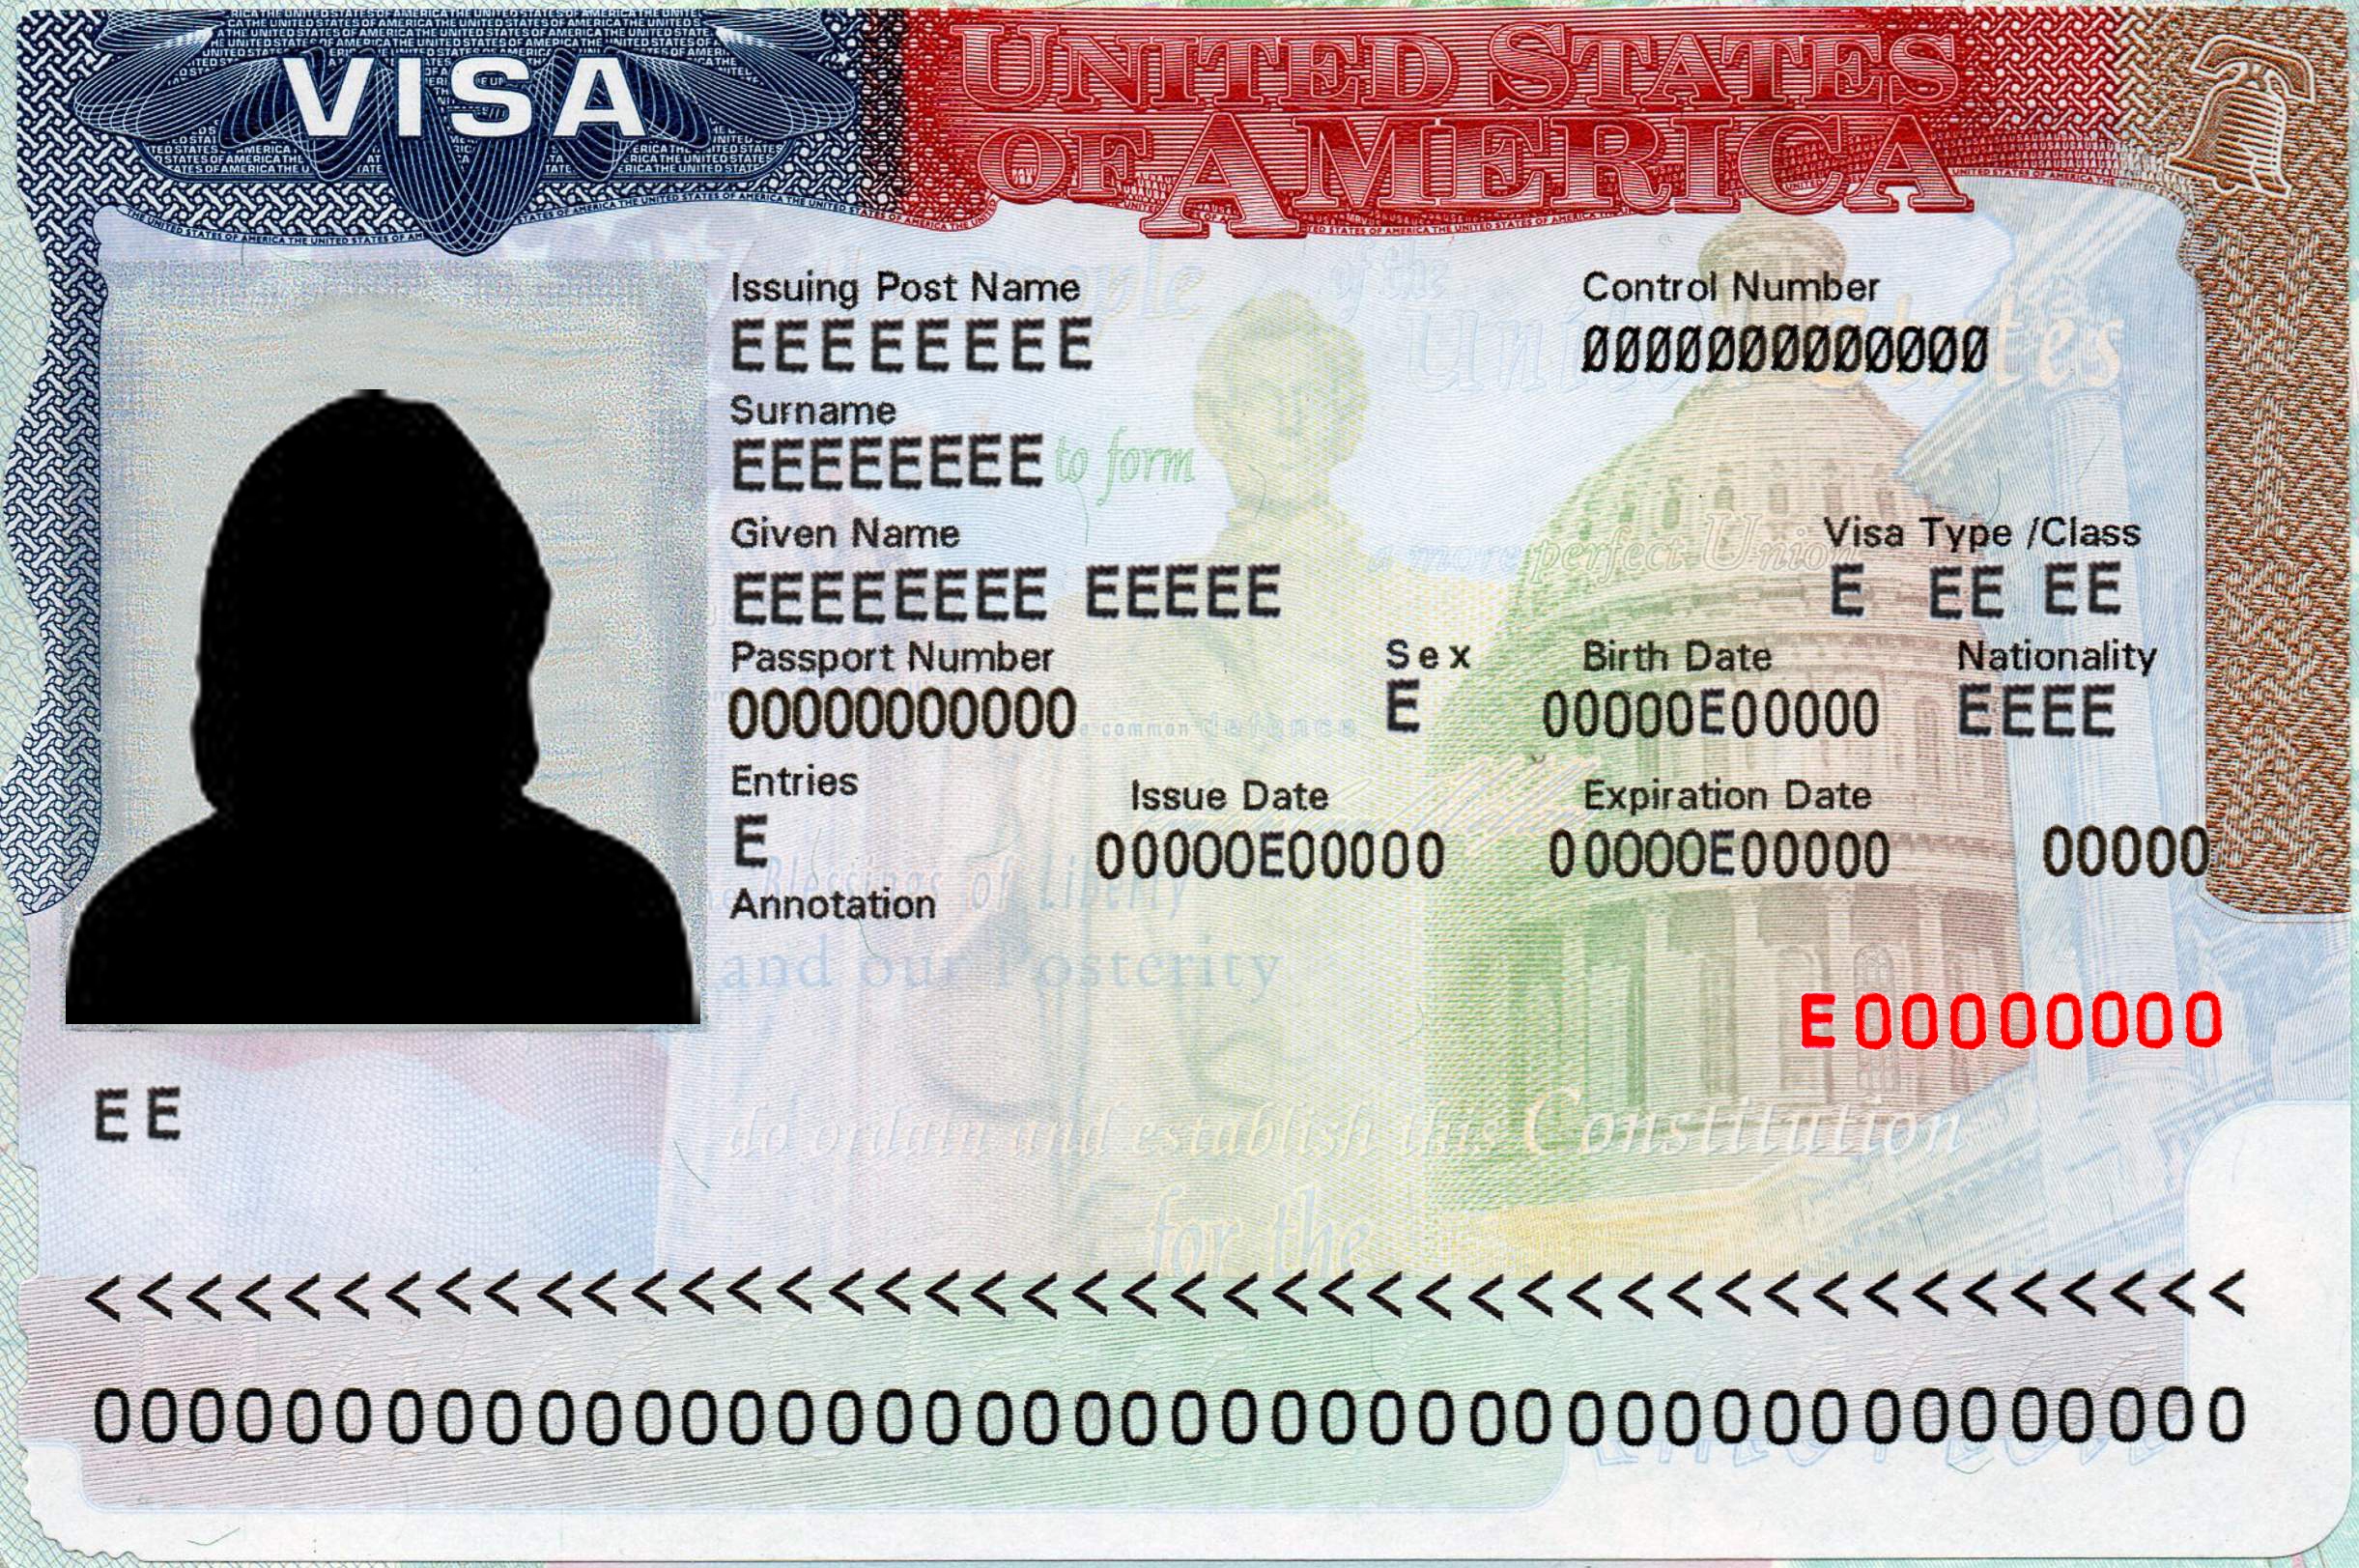 What are the different types of US visas